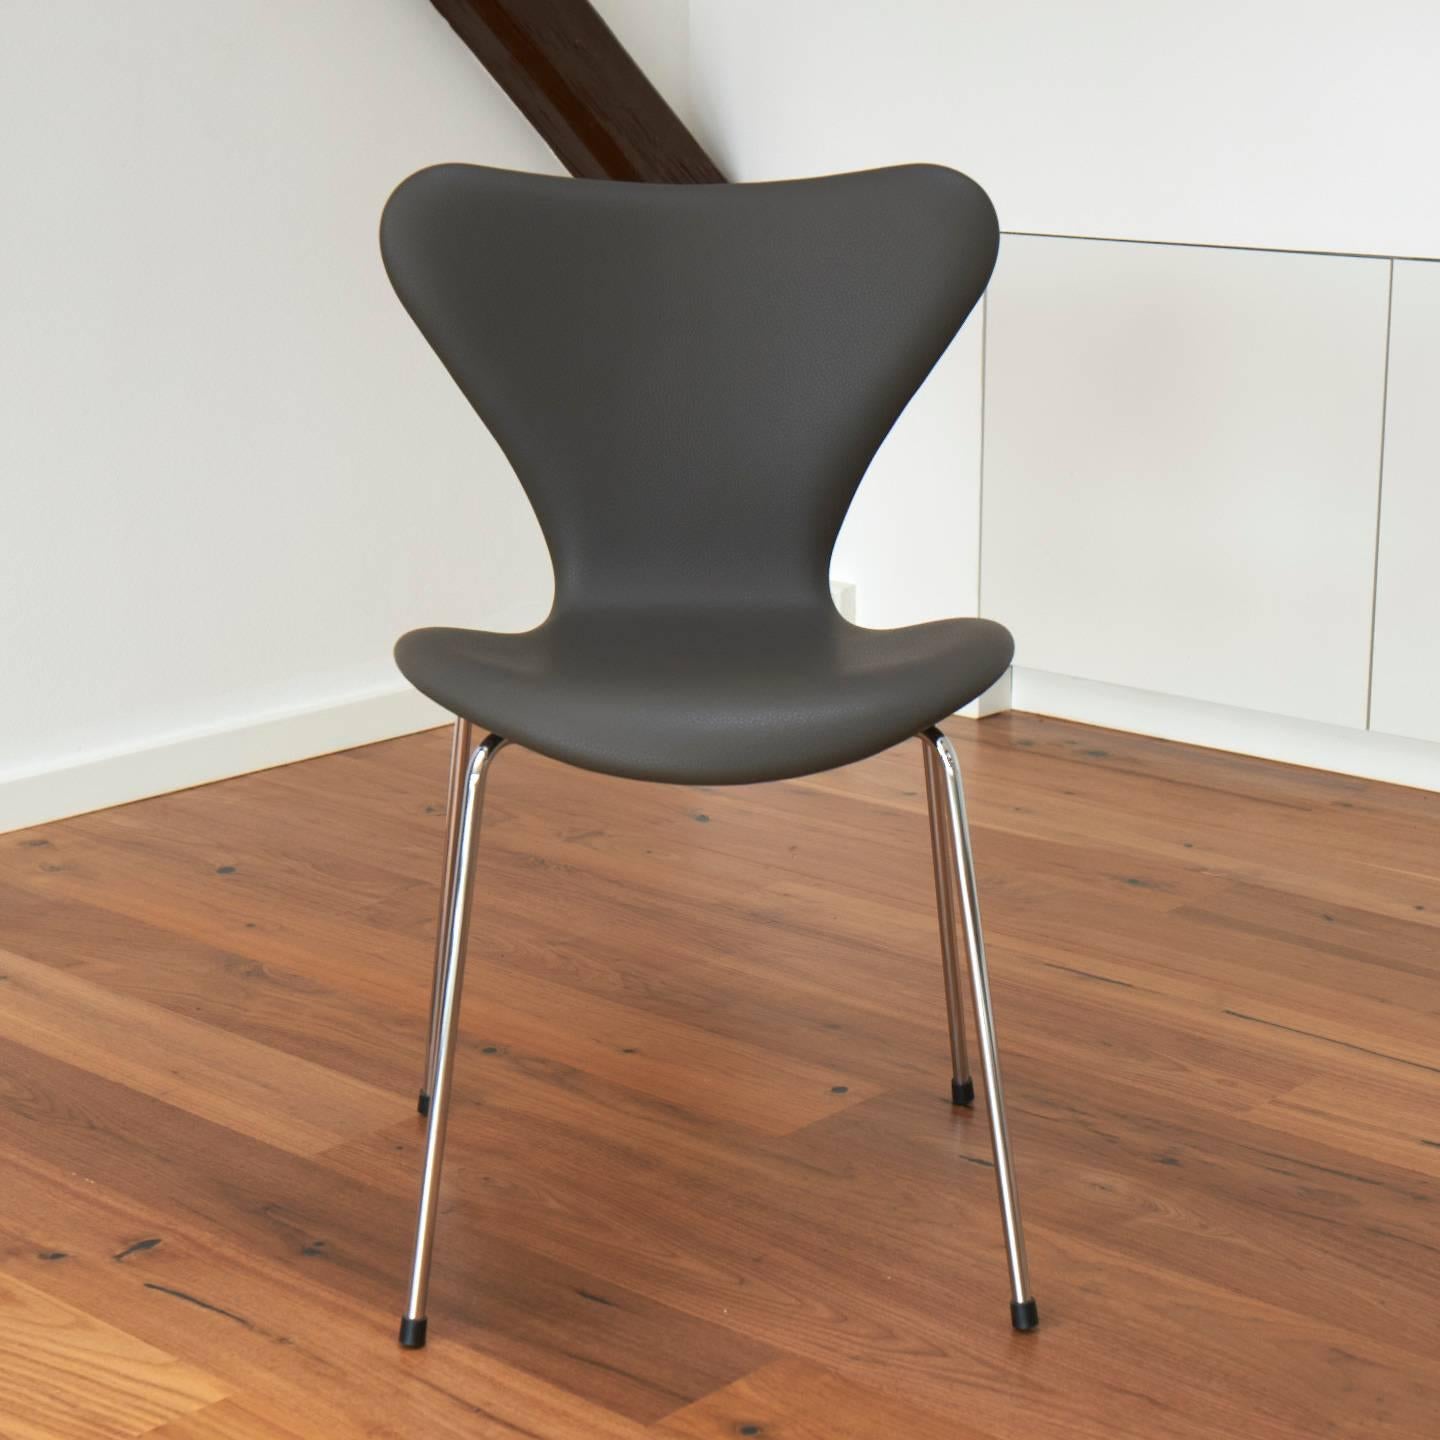 Six pieces. New Arne Jacobsen 3107 chairs in grey Classic leather. 
Manufactured by Fritz Hansen.